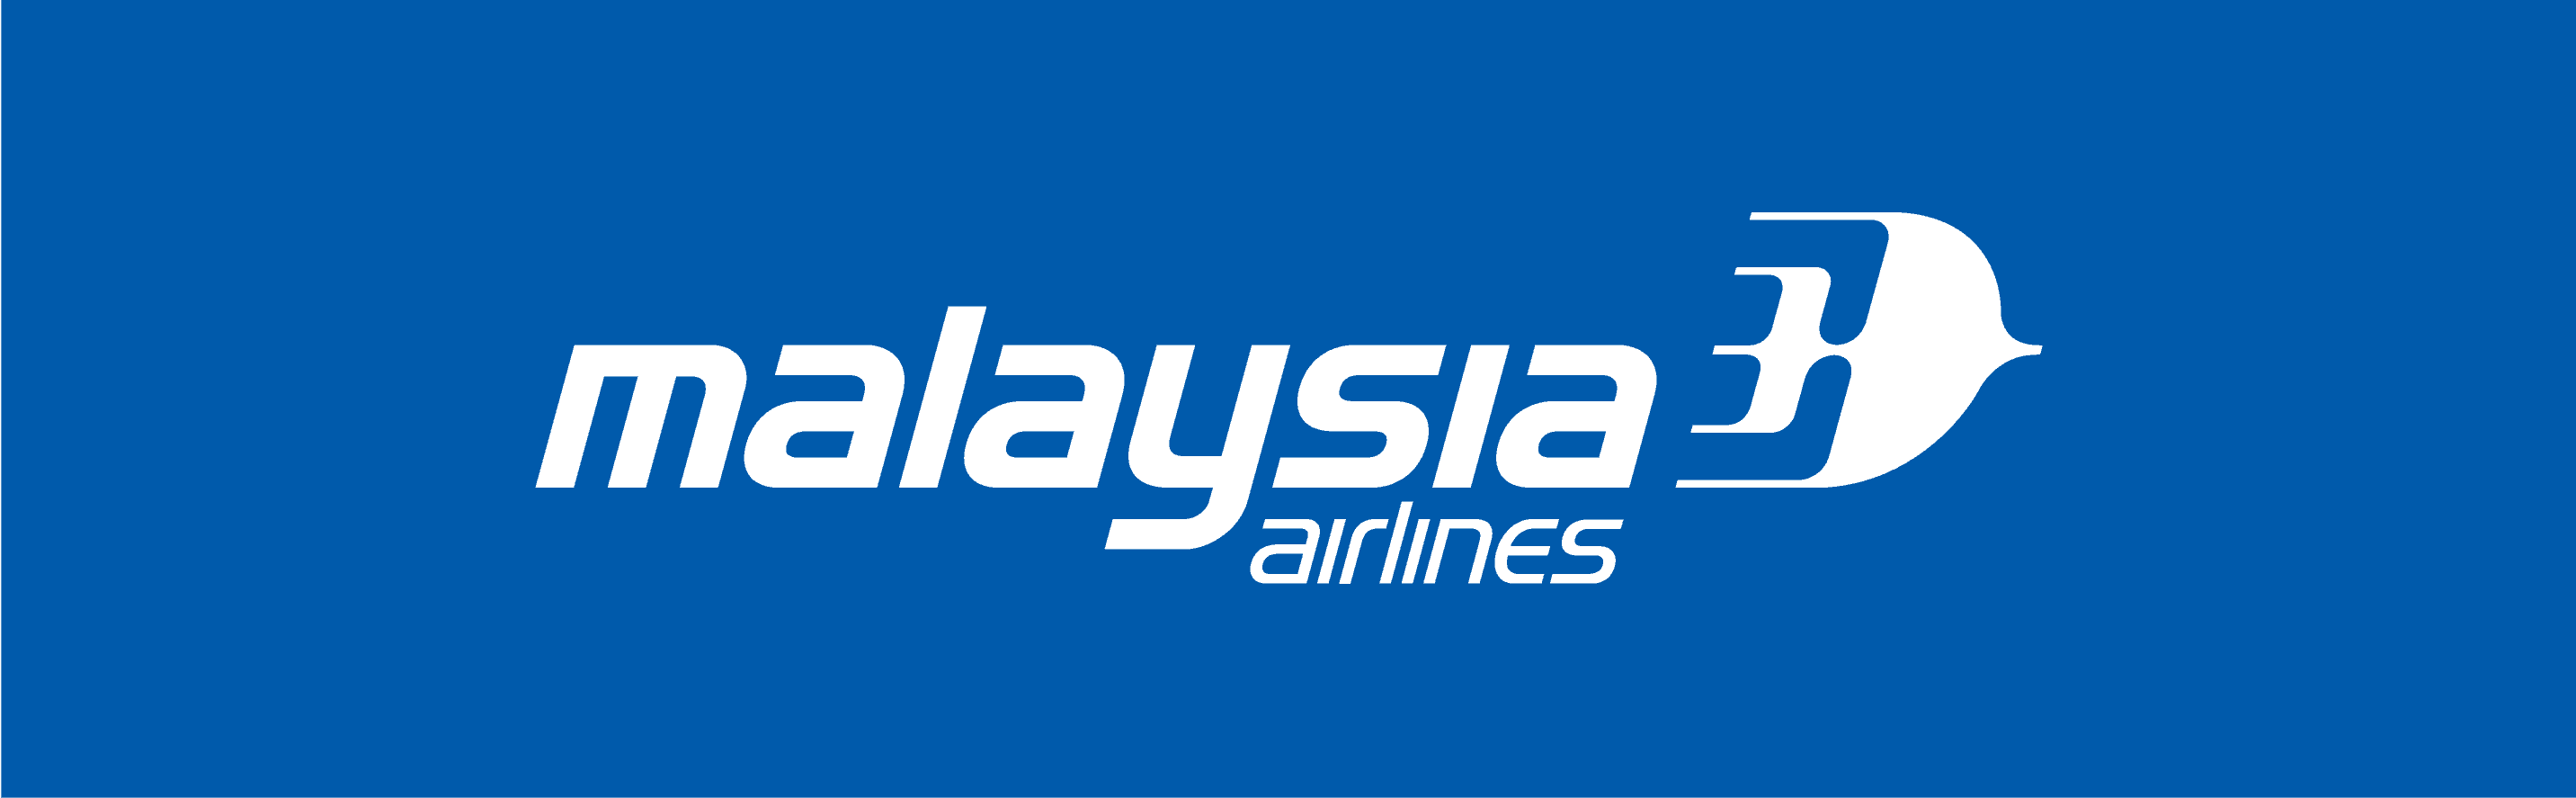 malaysia-airlines-promotions-and-coupon-codes-singapore-2020